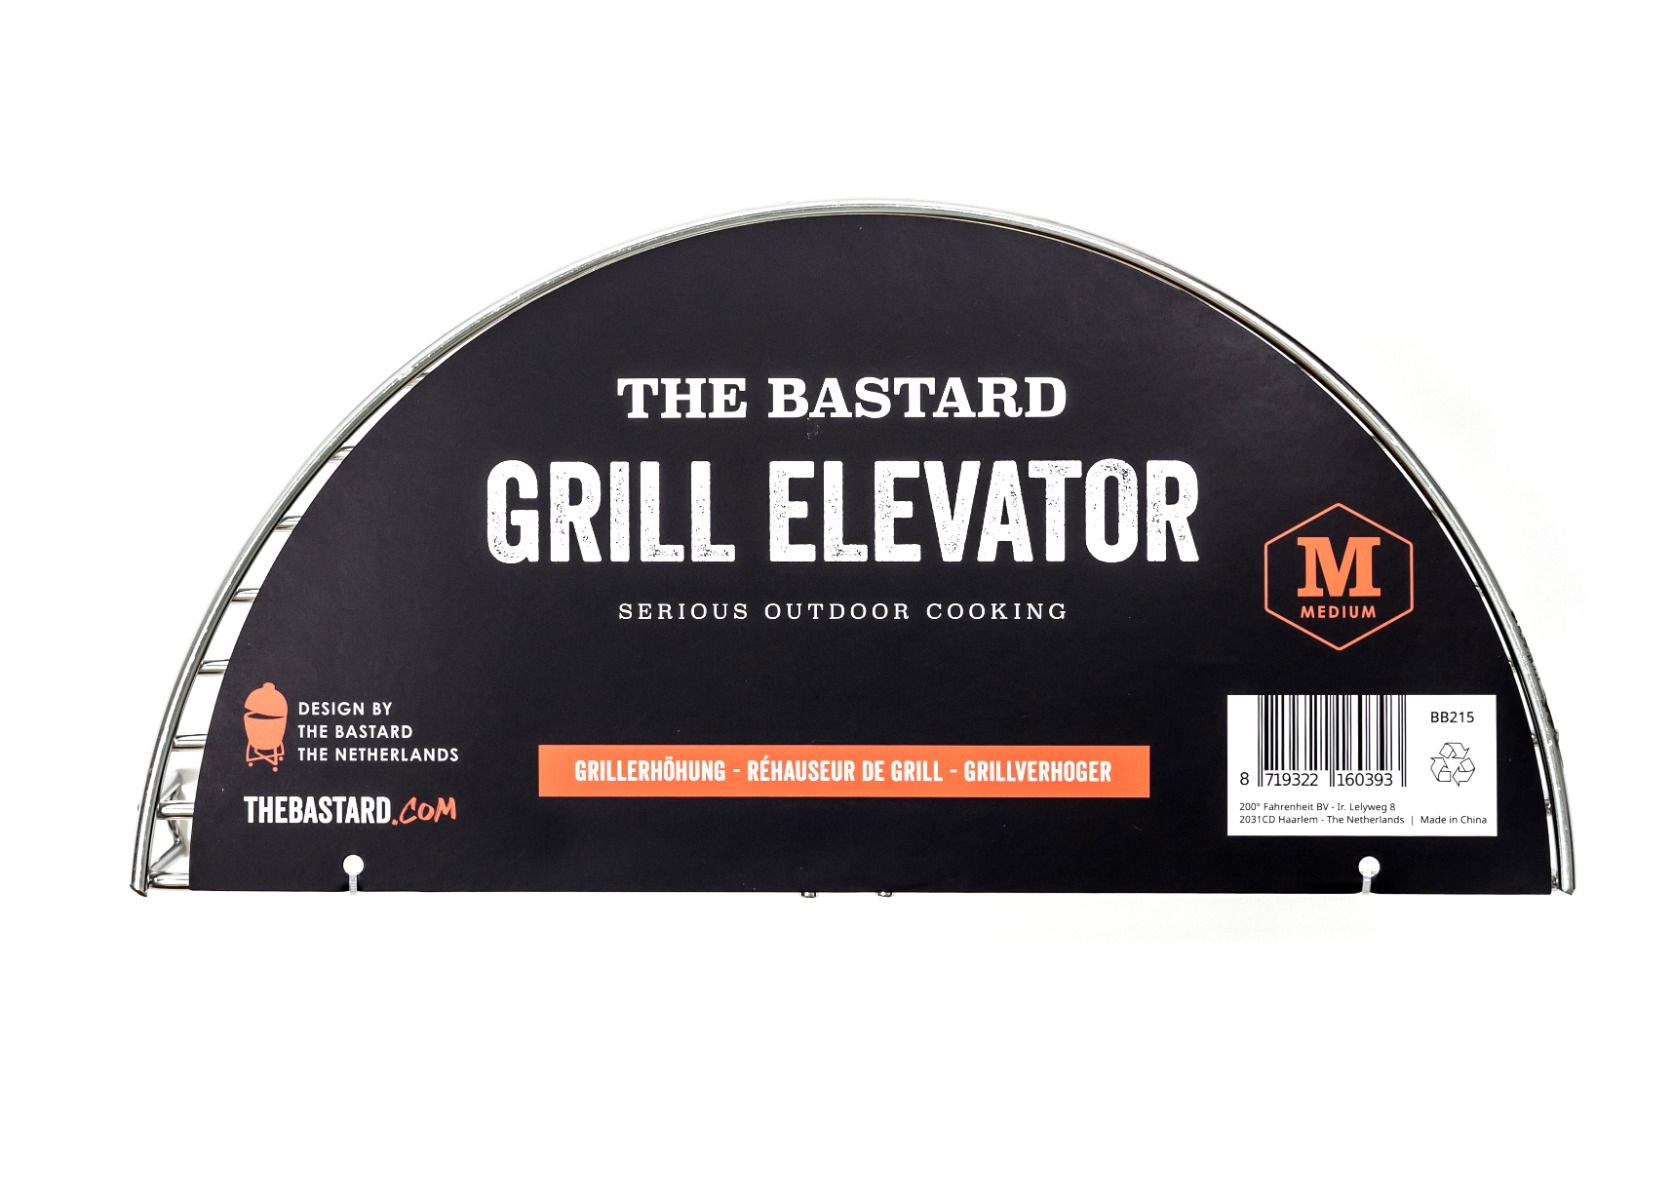 The Bastard Grill Elevator Stainless Steel